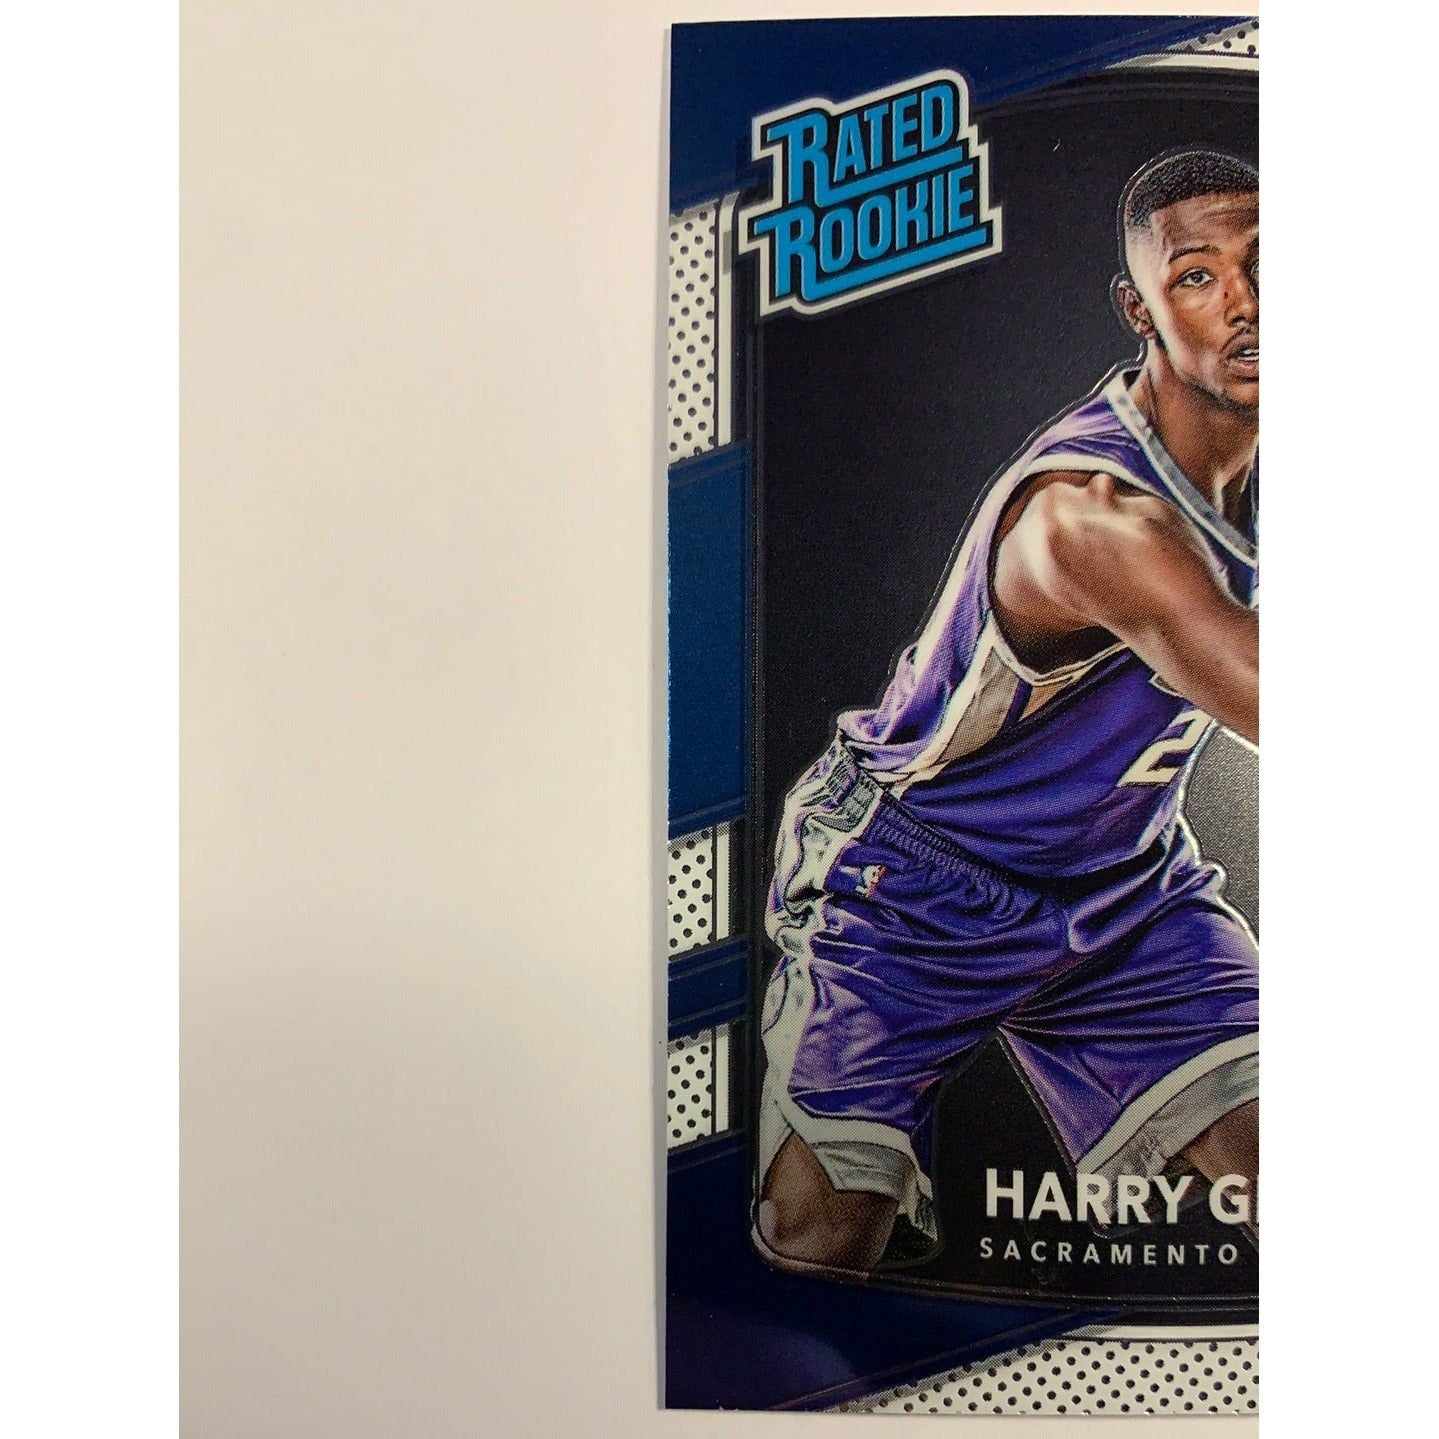  2017-18 Donruss Optic Harry Giles Rated Rookie  Local Legends Cards & Collectibles